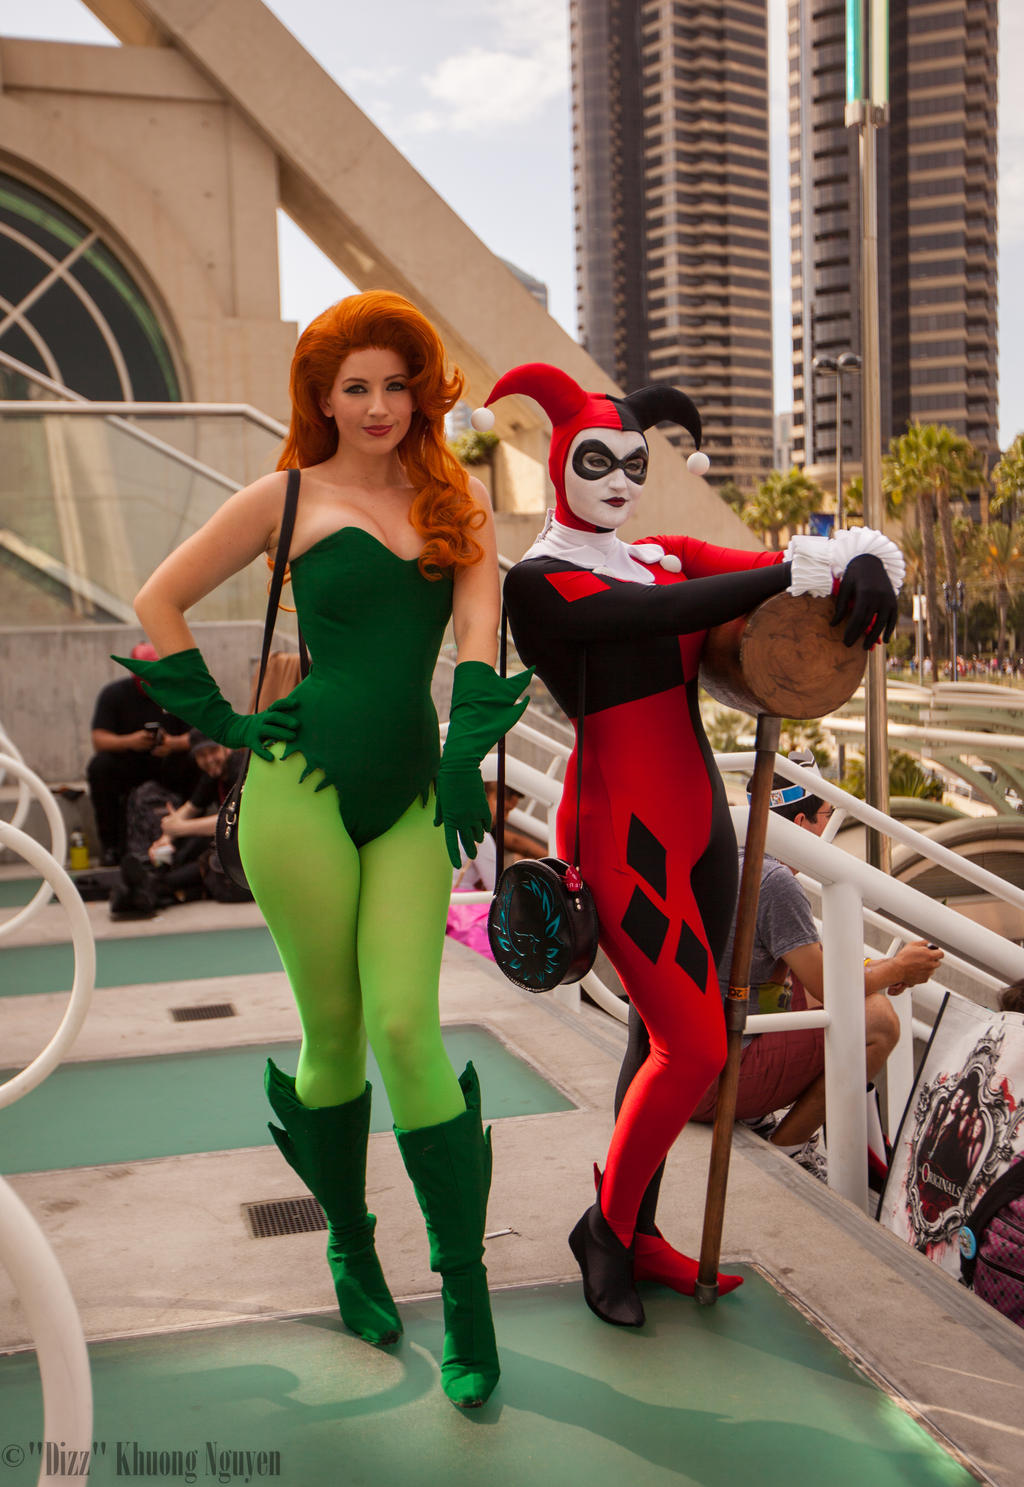 cosplay and poison ivy Harley quinn